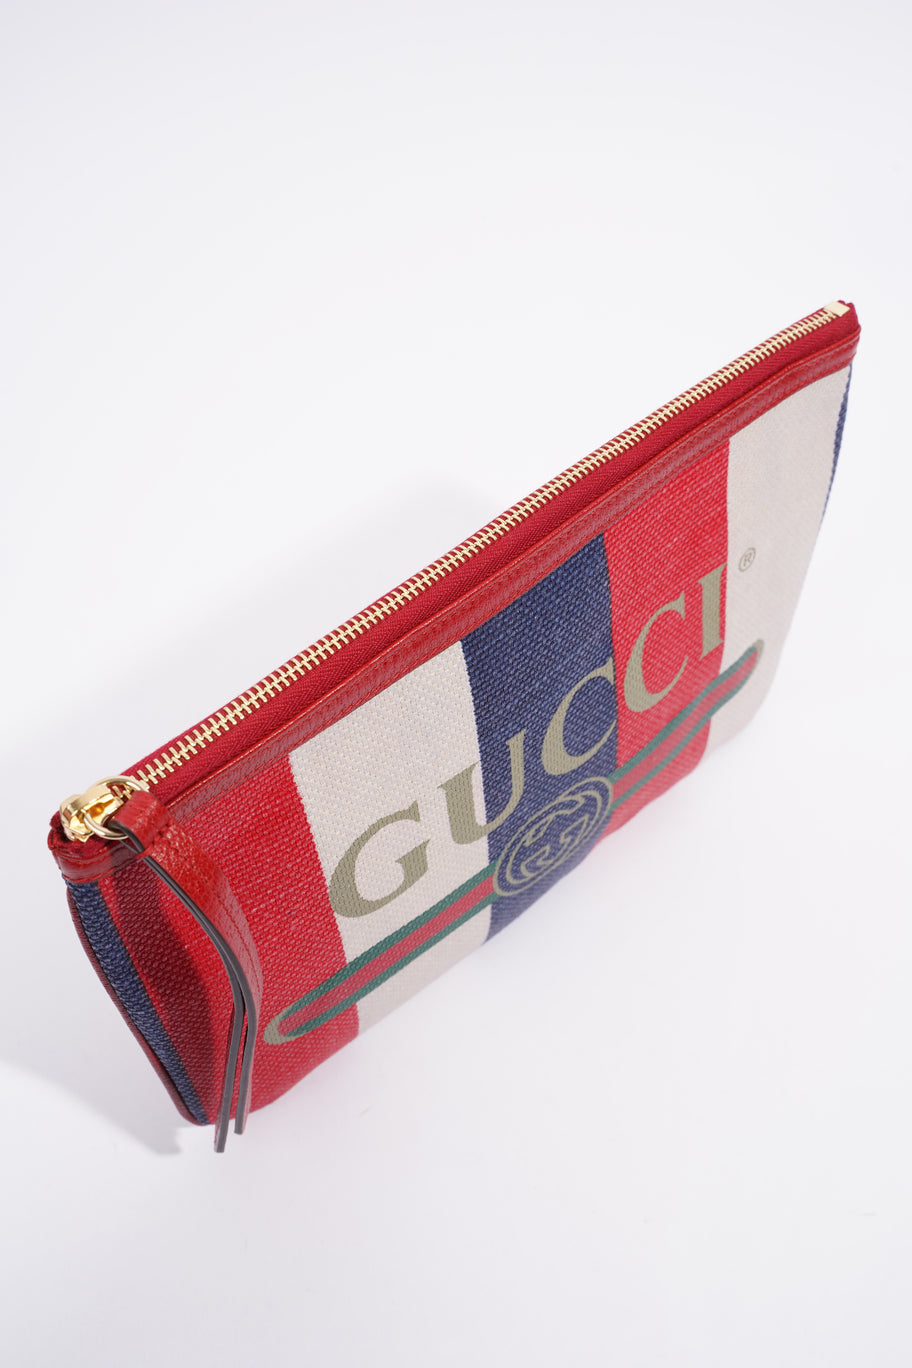 Clutch Red / White / Blue Canvas Image 7